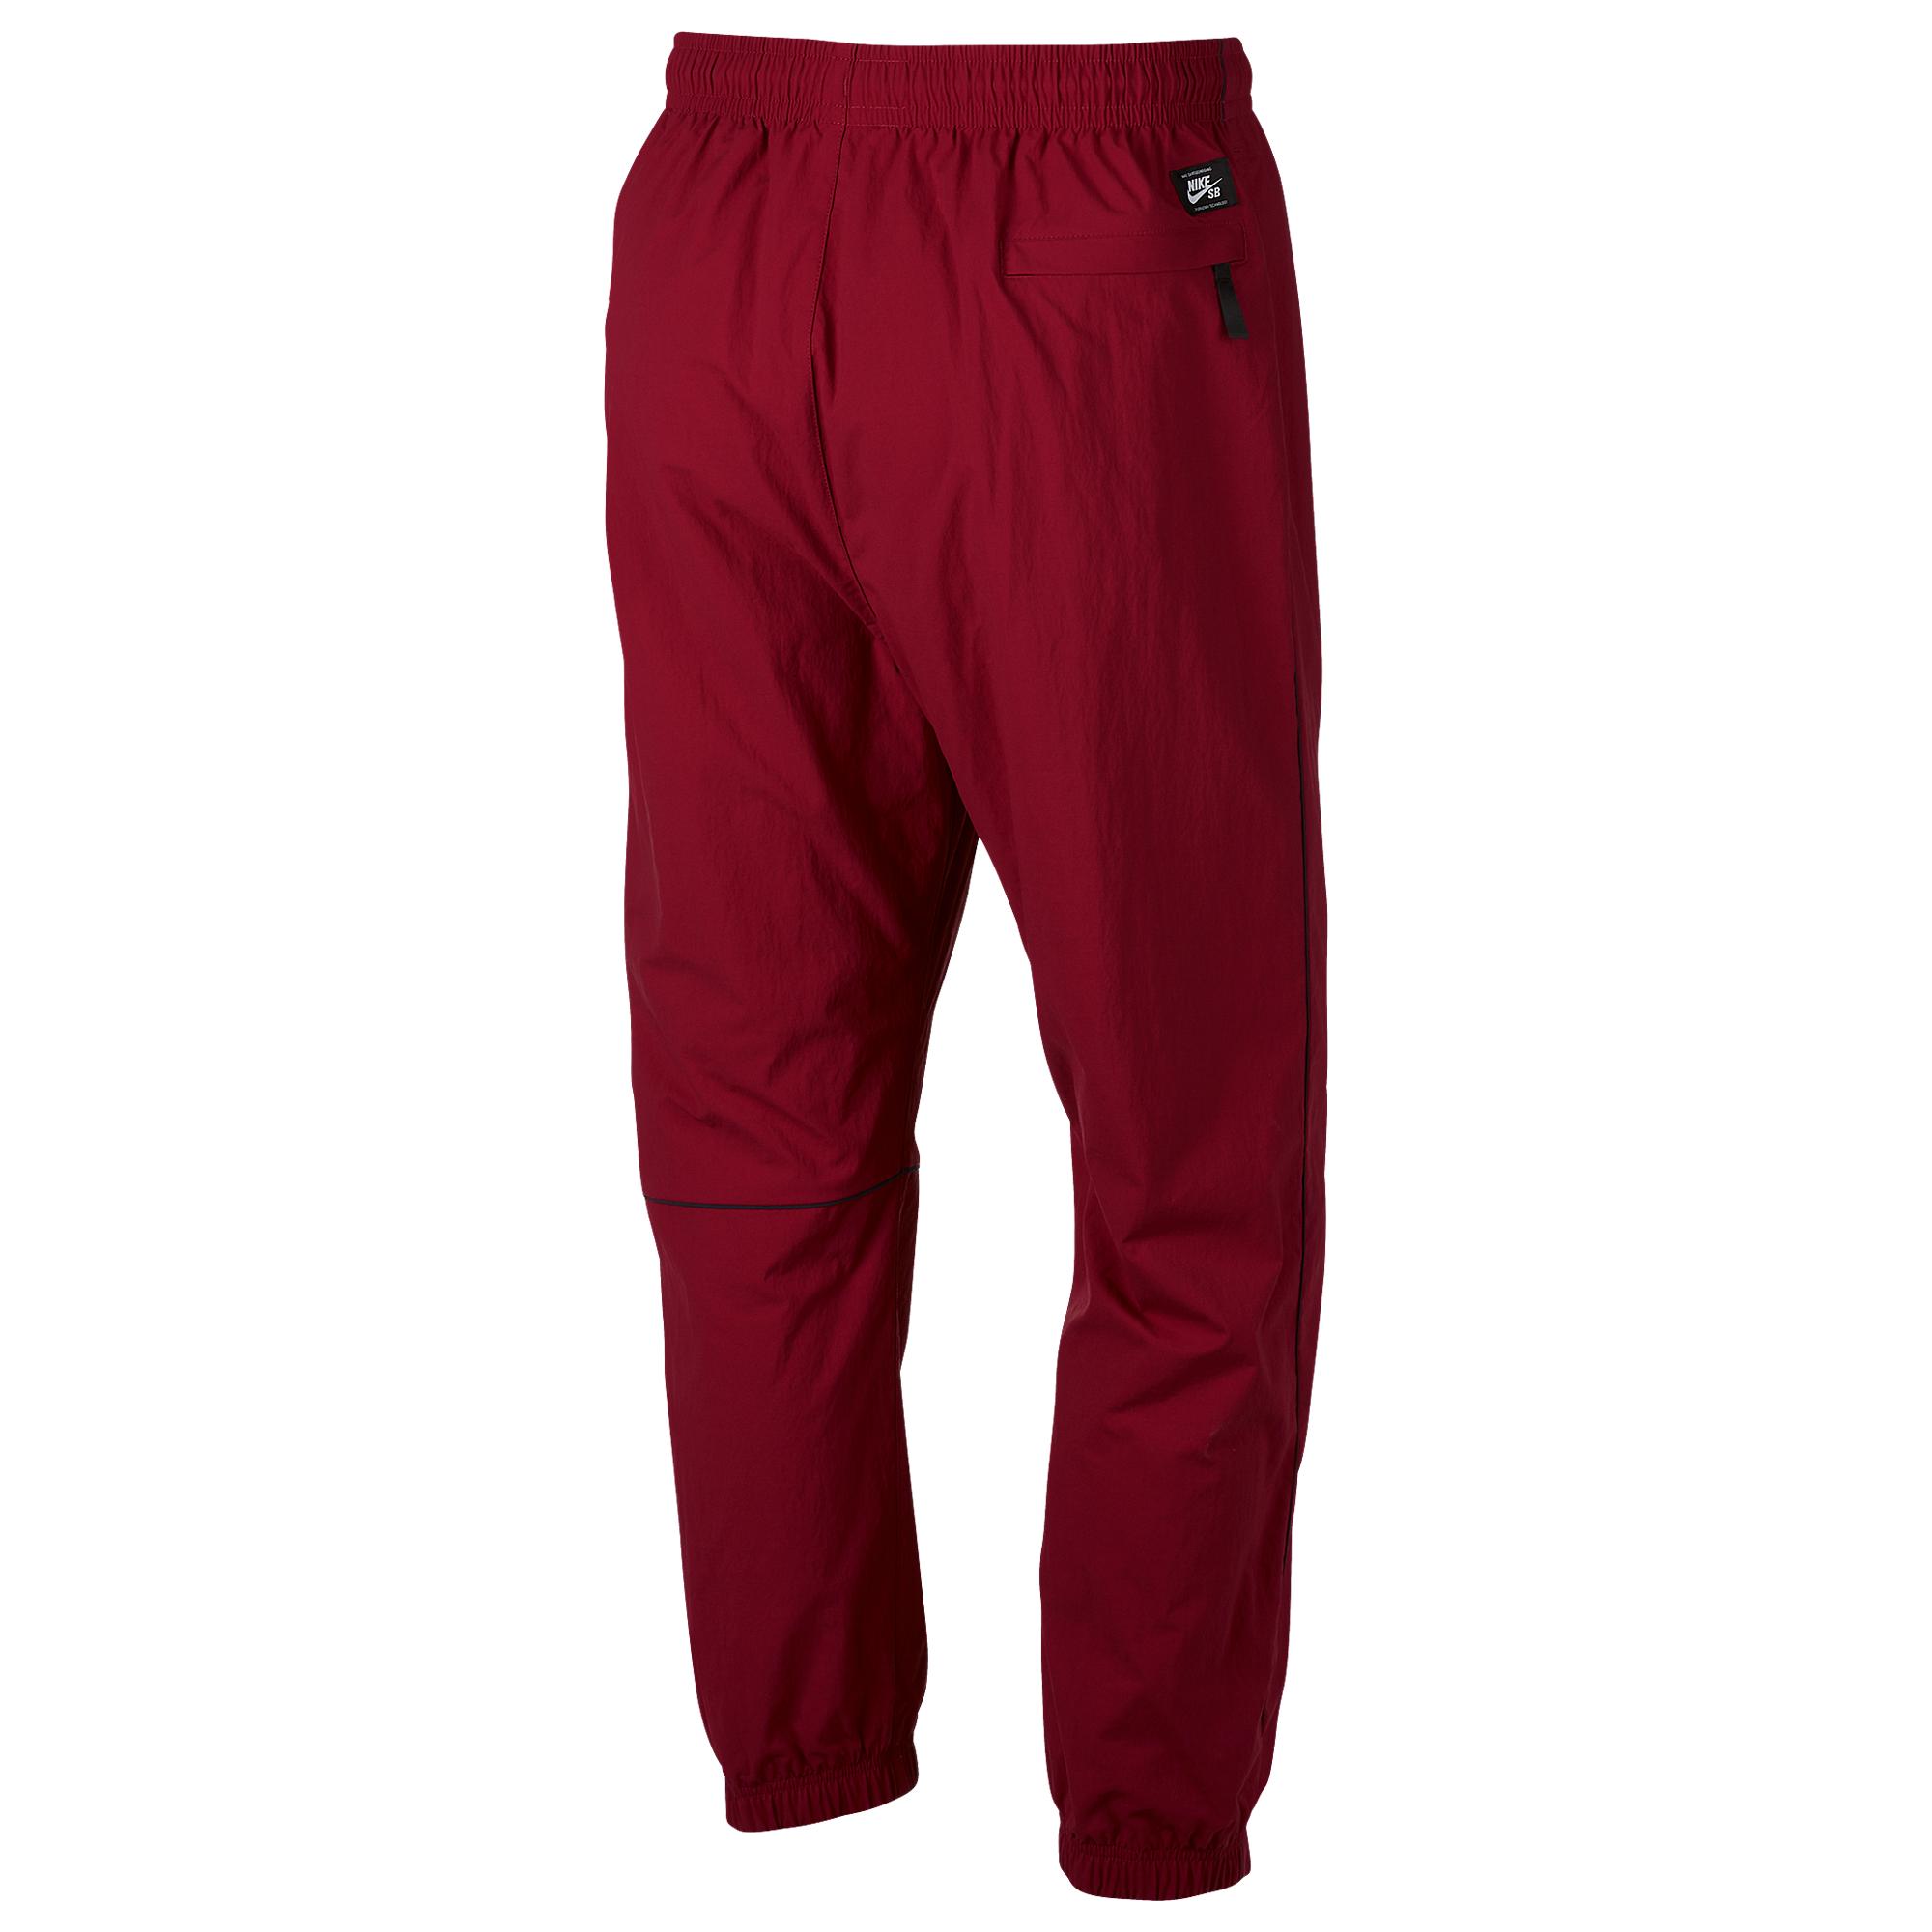 Nike Wind Swoosh Track Pants in Red for Men - Lyst